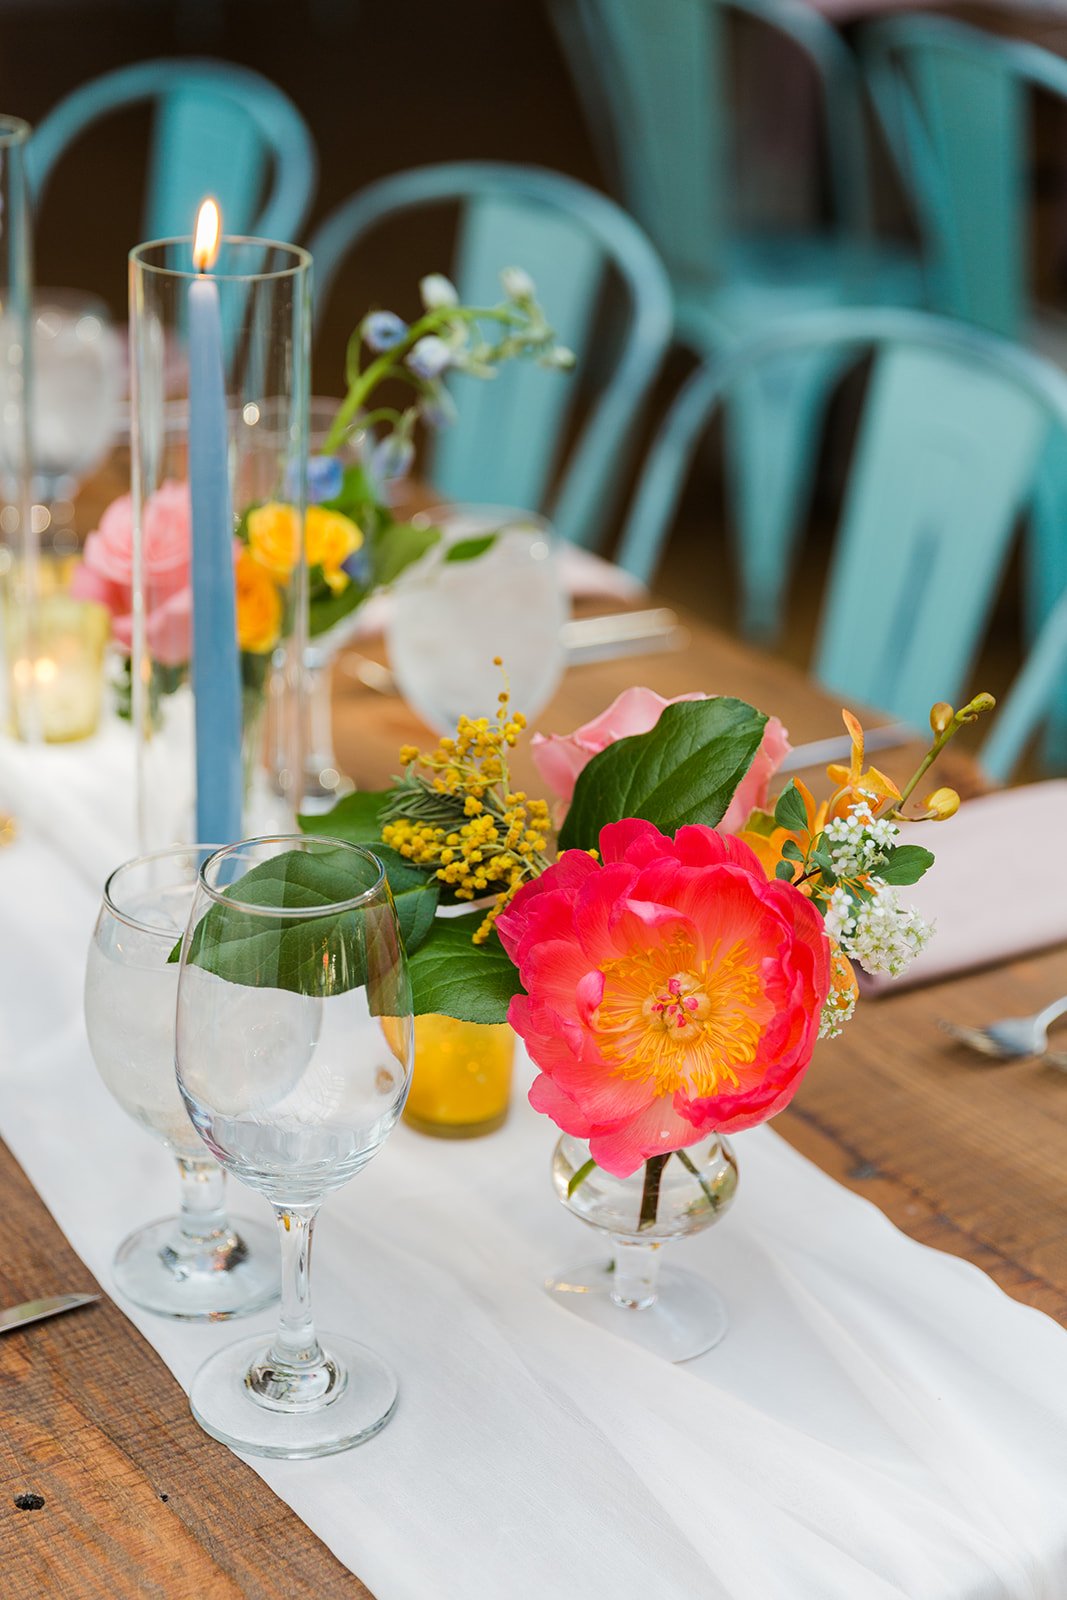  Documentary detail of wedding table decor with bright florals, tall colorful candles and airy white linens at nontraditional Jewish and Venezuelan wedding  at The Joinery Chicago an Industrial loft wedding venue In Logan Square. Great wedding decor 